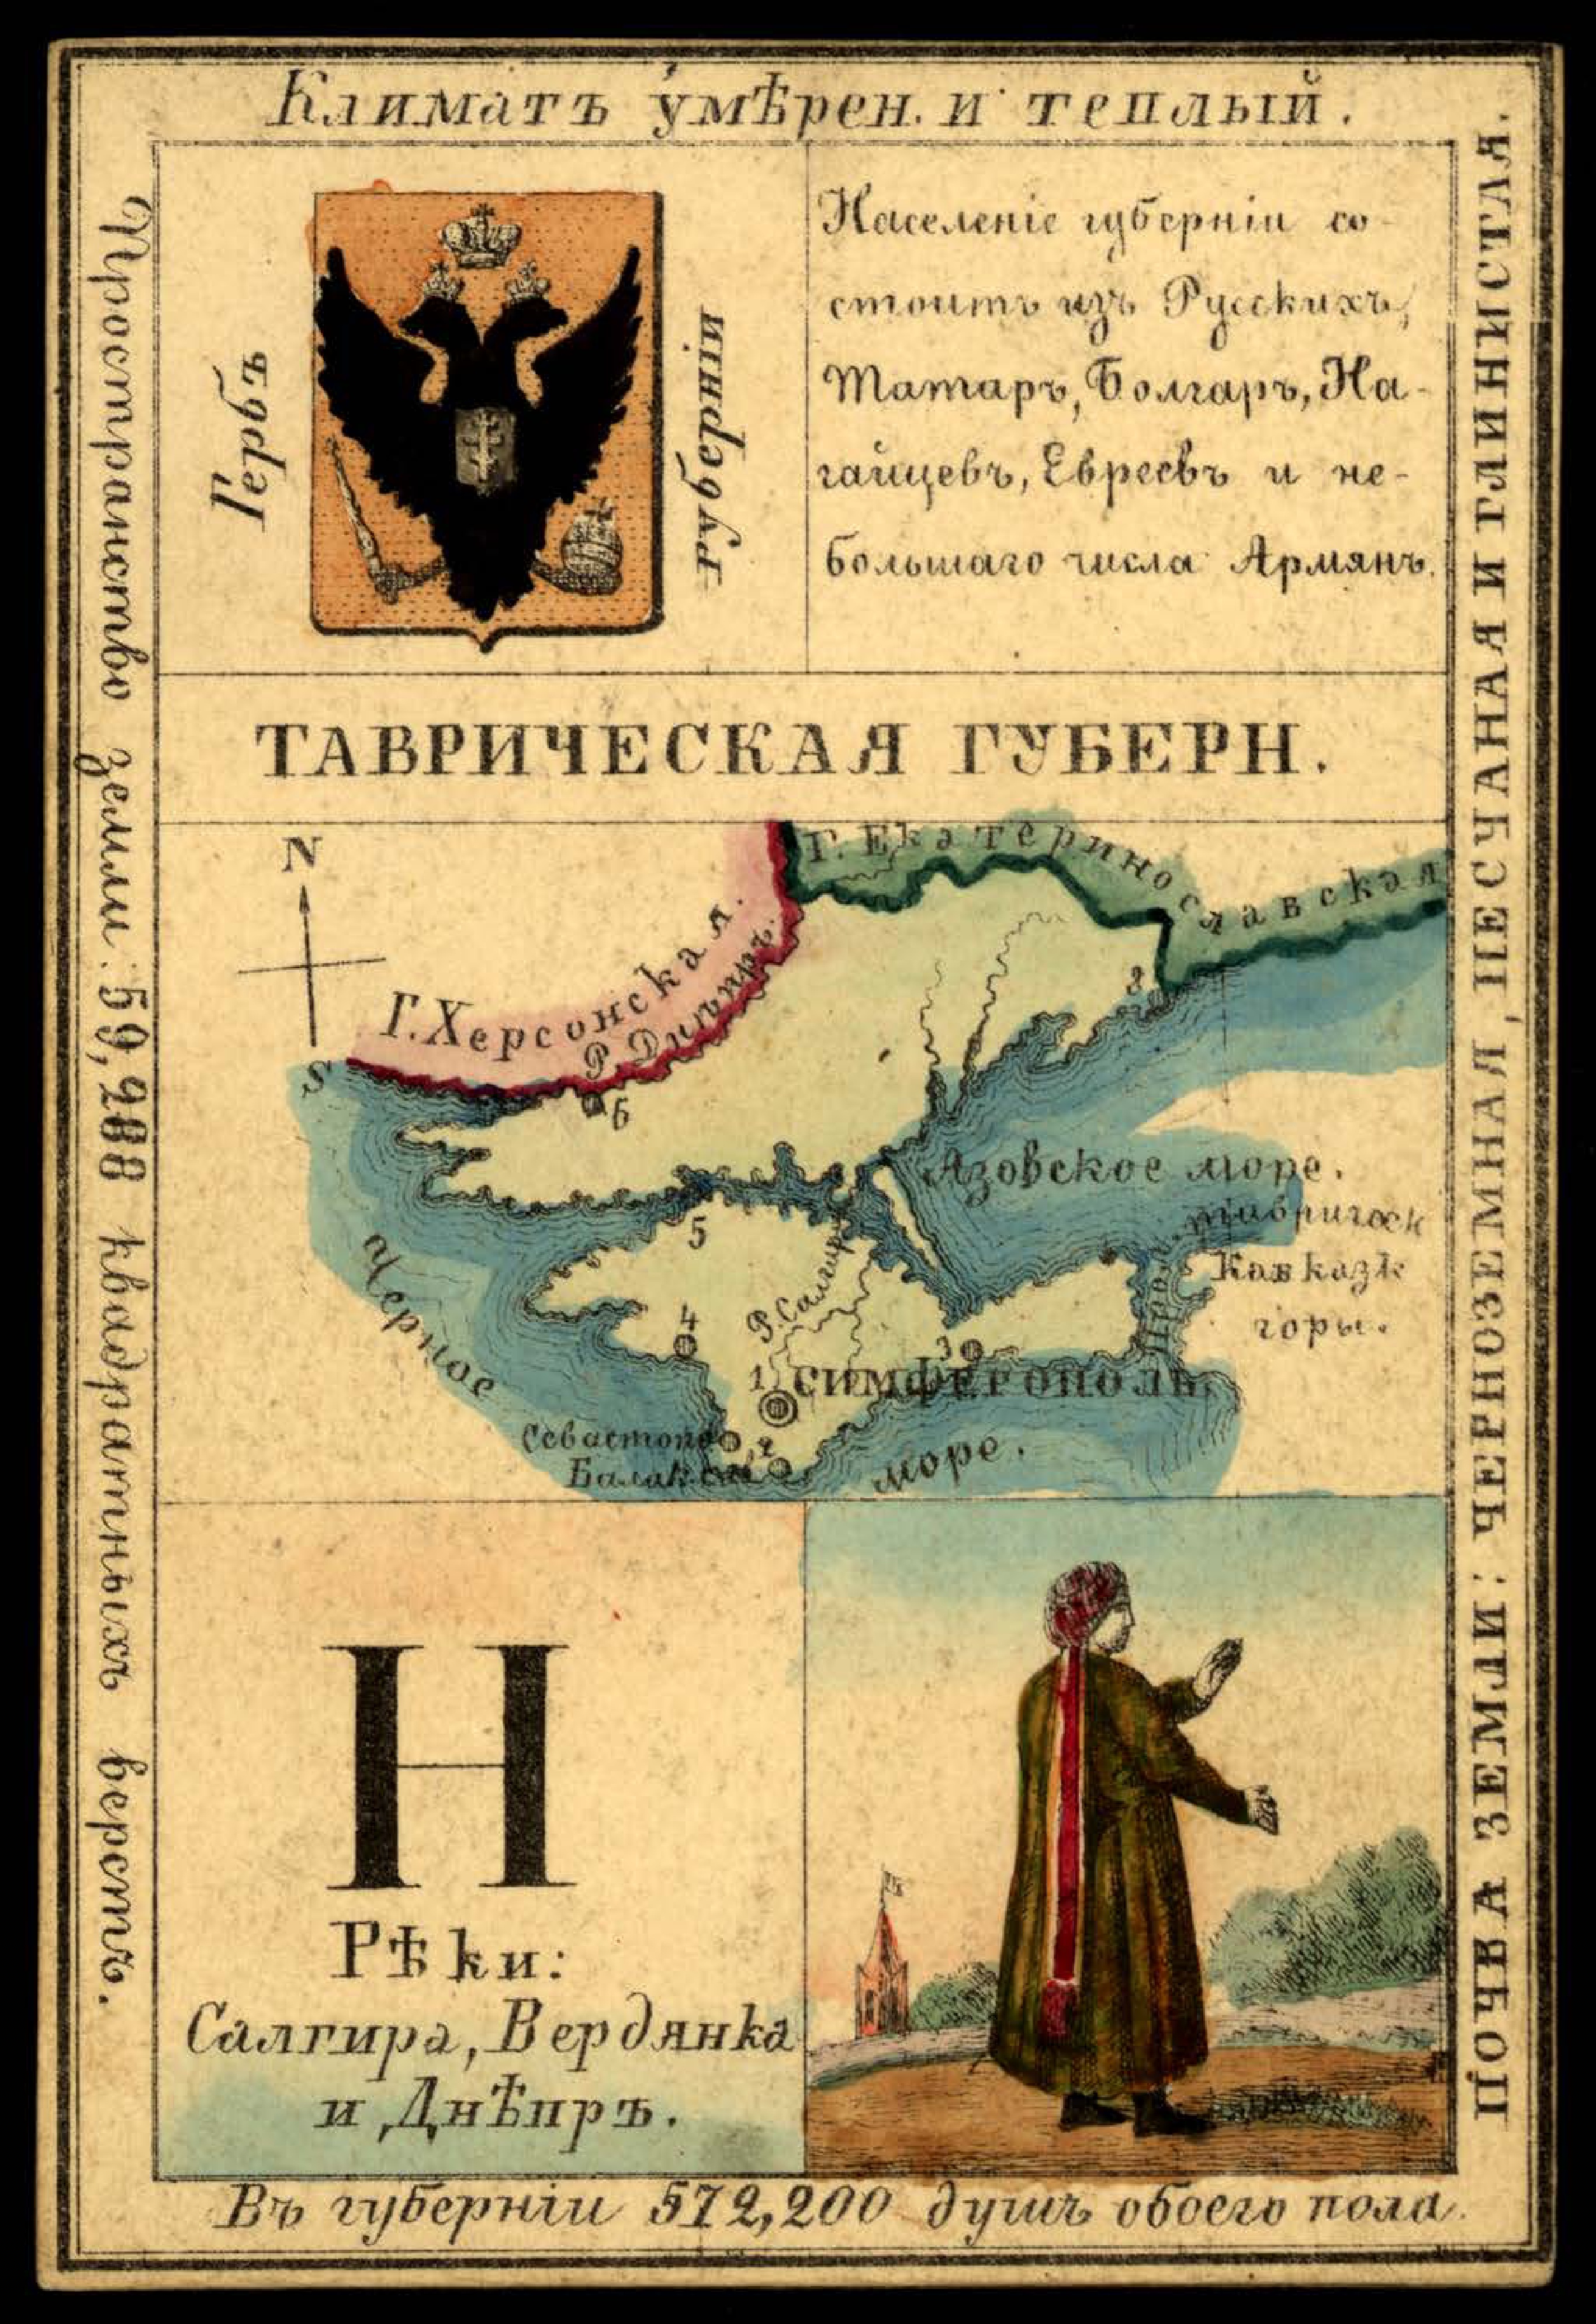 1856. Card from set of geographical cards of the Russian Empire 130